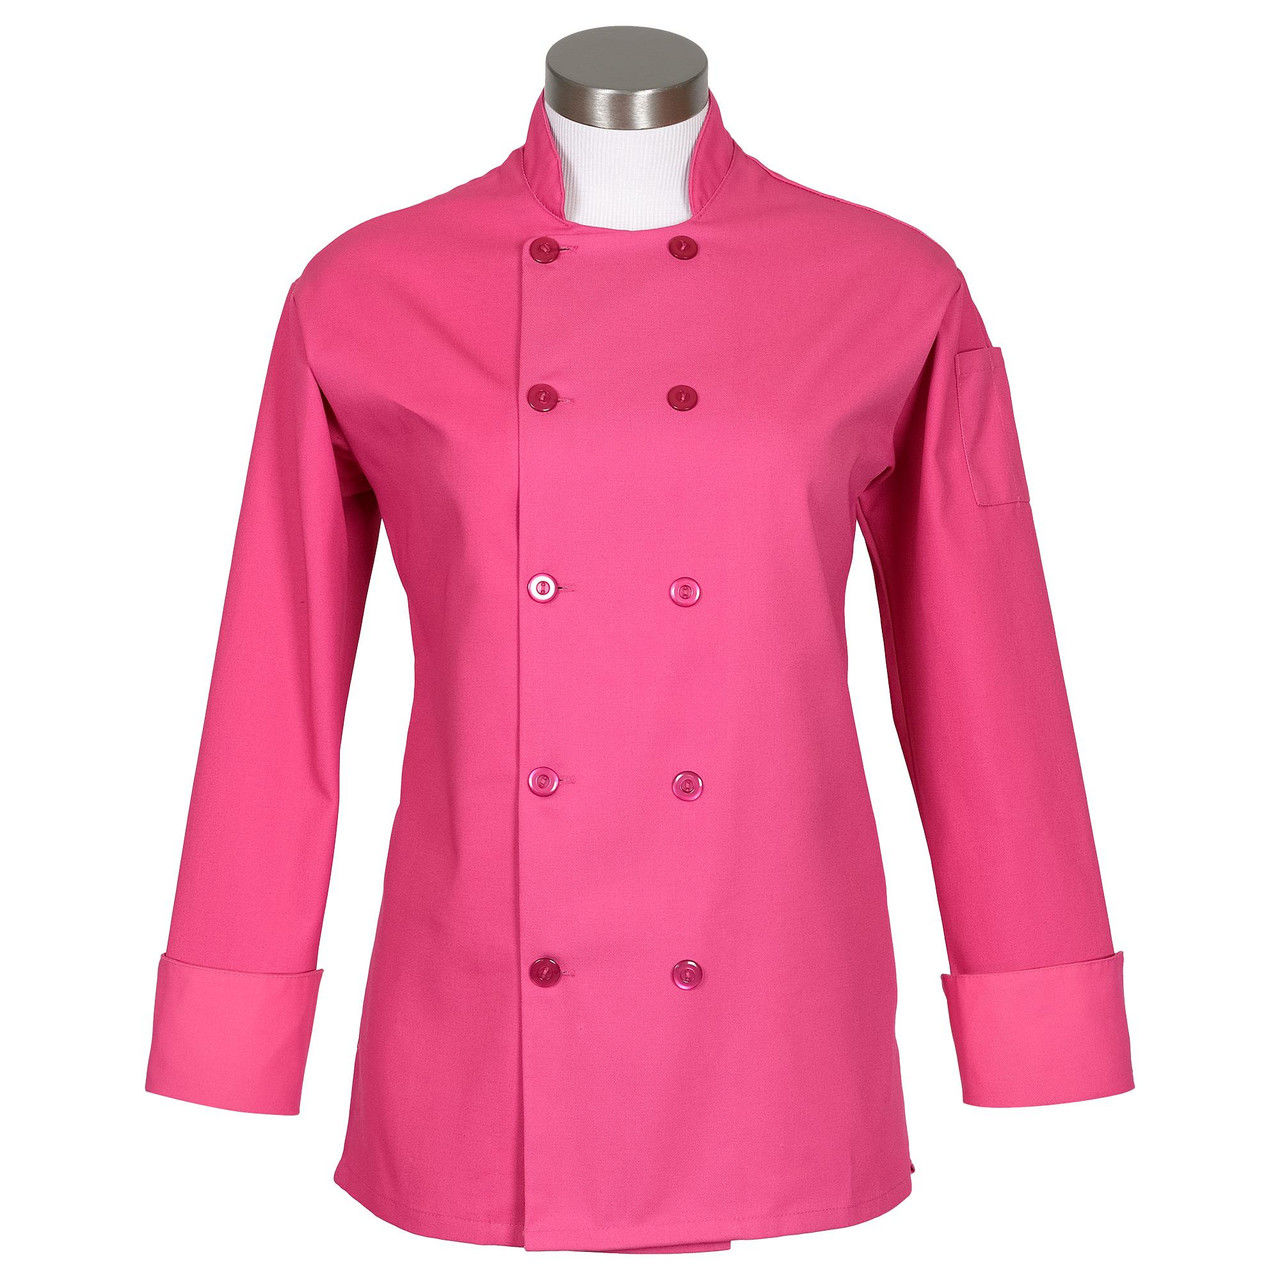 What material are the chef coats womens long sleeve made of?